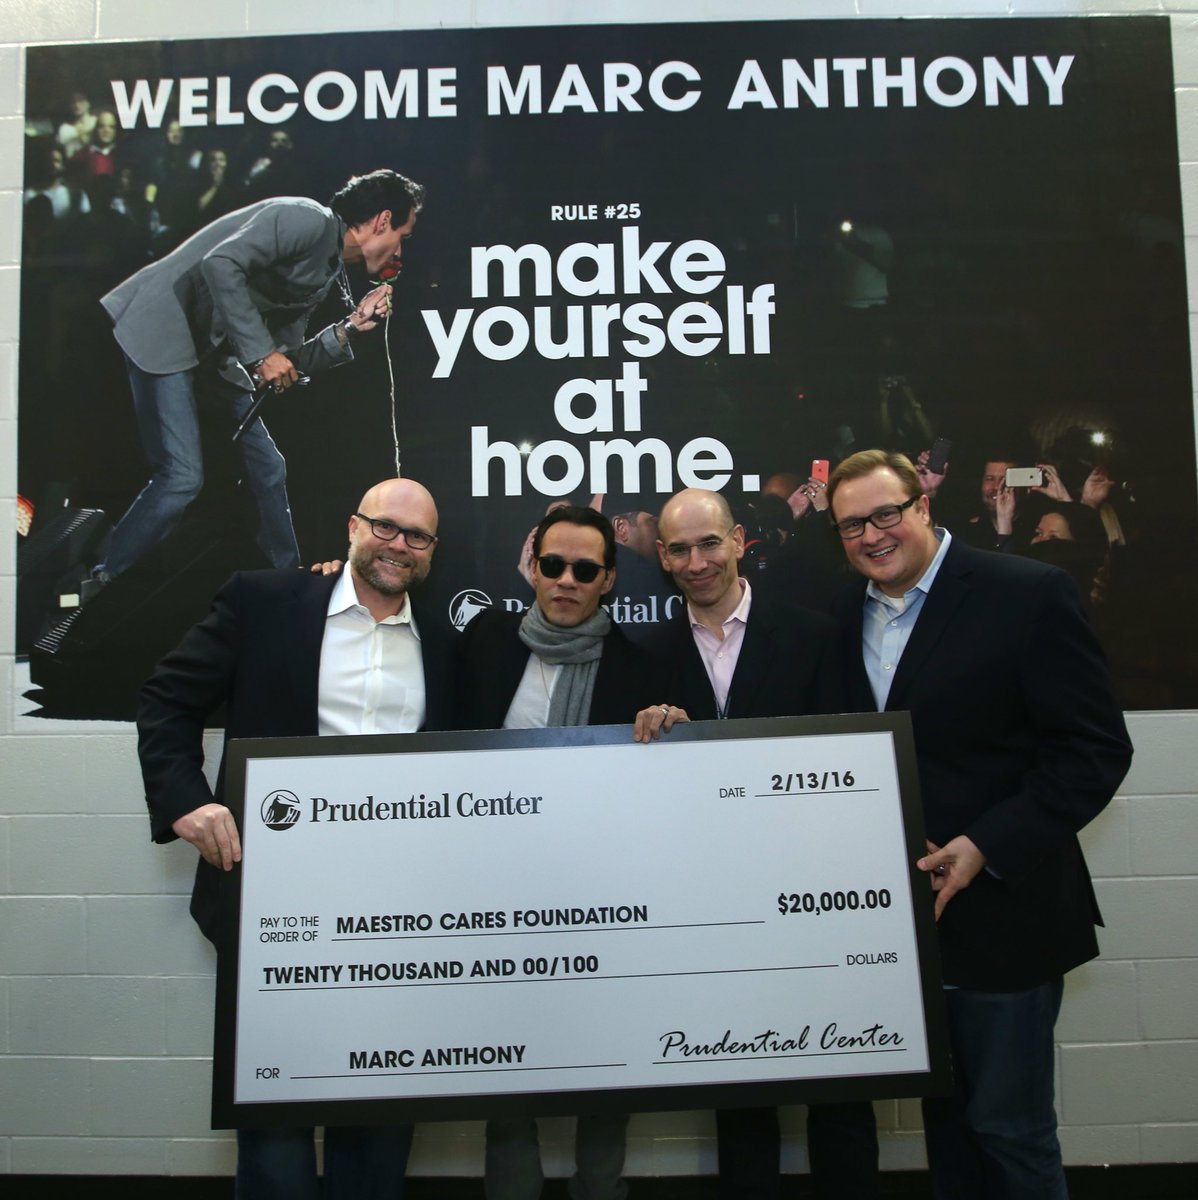 RT @PruCenter: Thank you @MarcAnthony for last night's SOLD-OUT performance #LIVEatPruCenter! https://t.co/GLFD8CPoUs